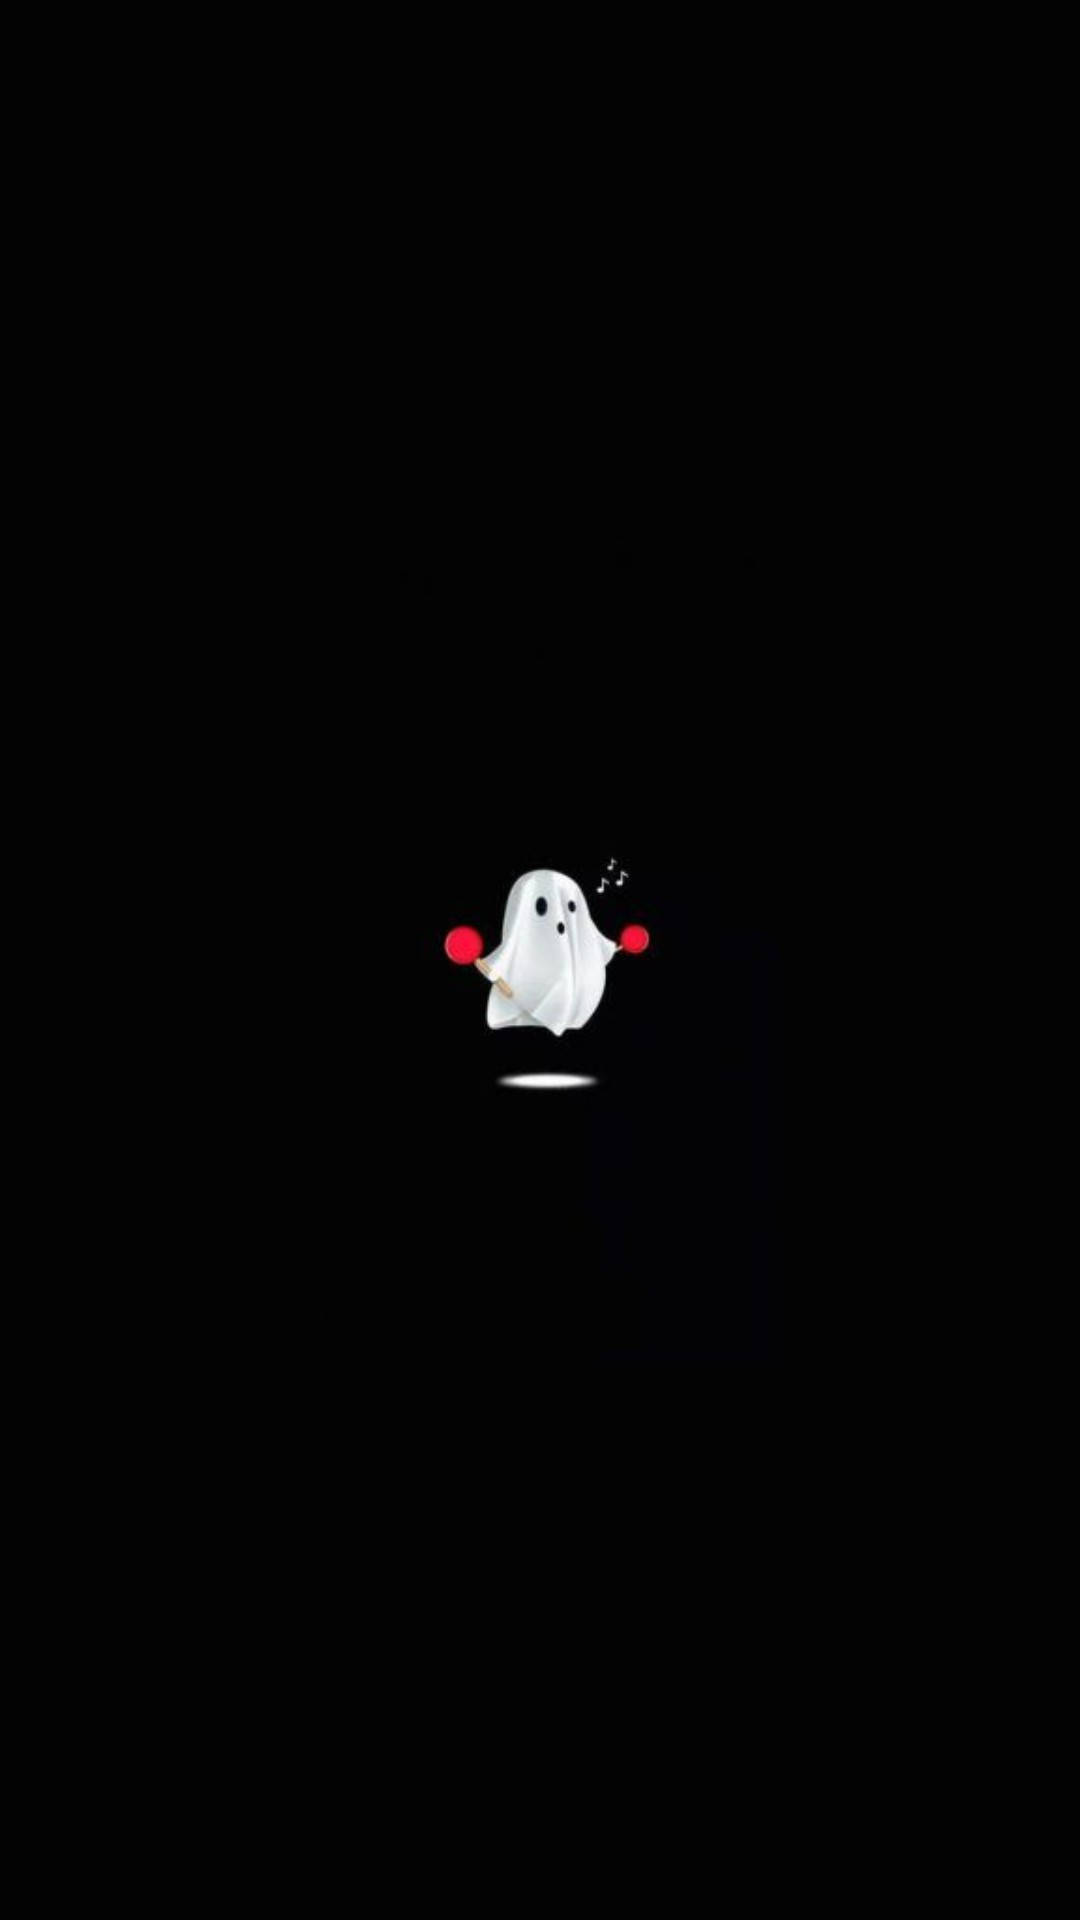 Whistling Ghost Black Apple Iphone Background